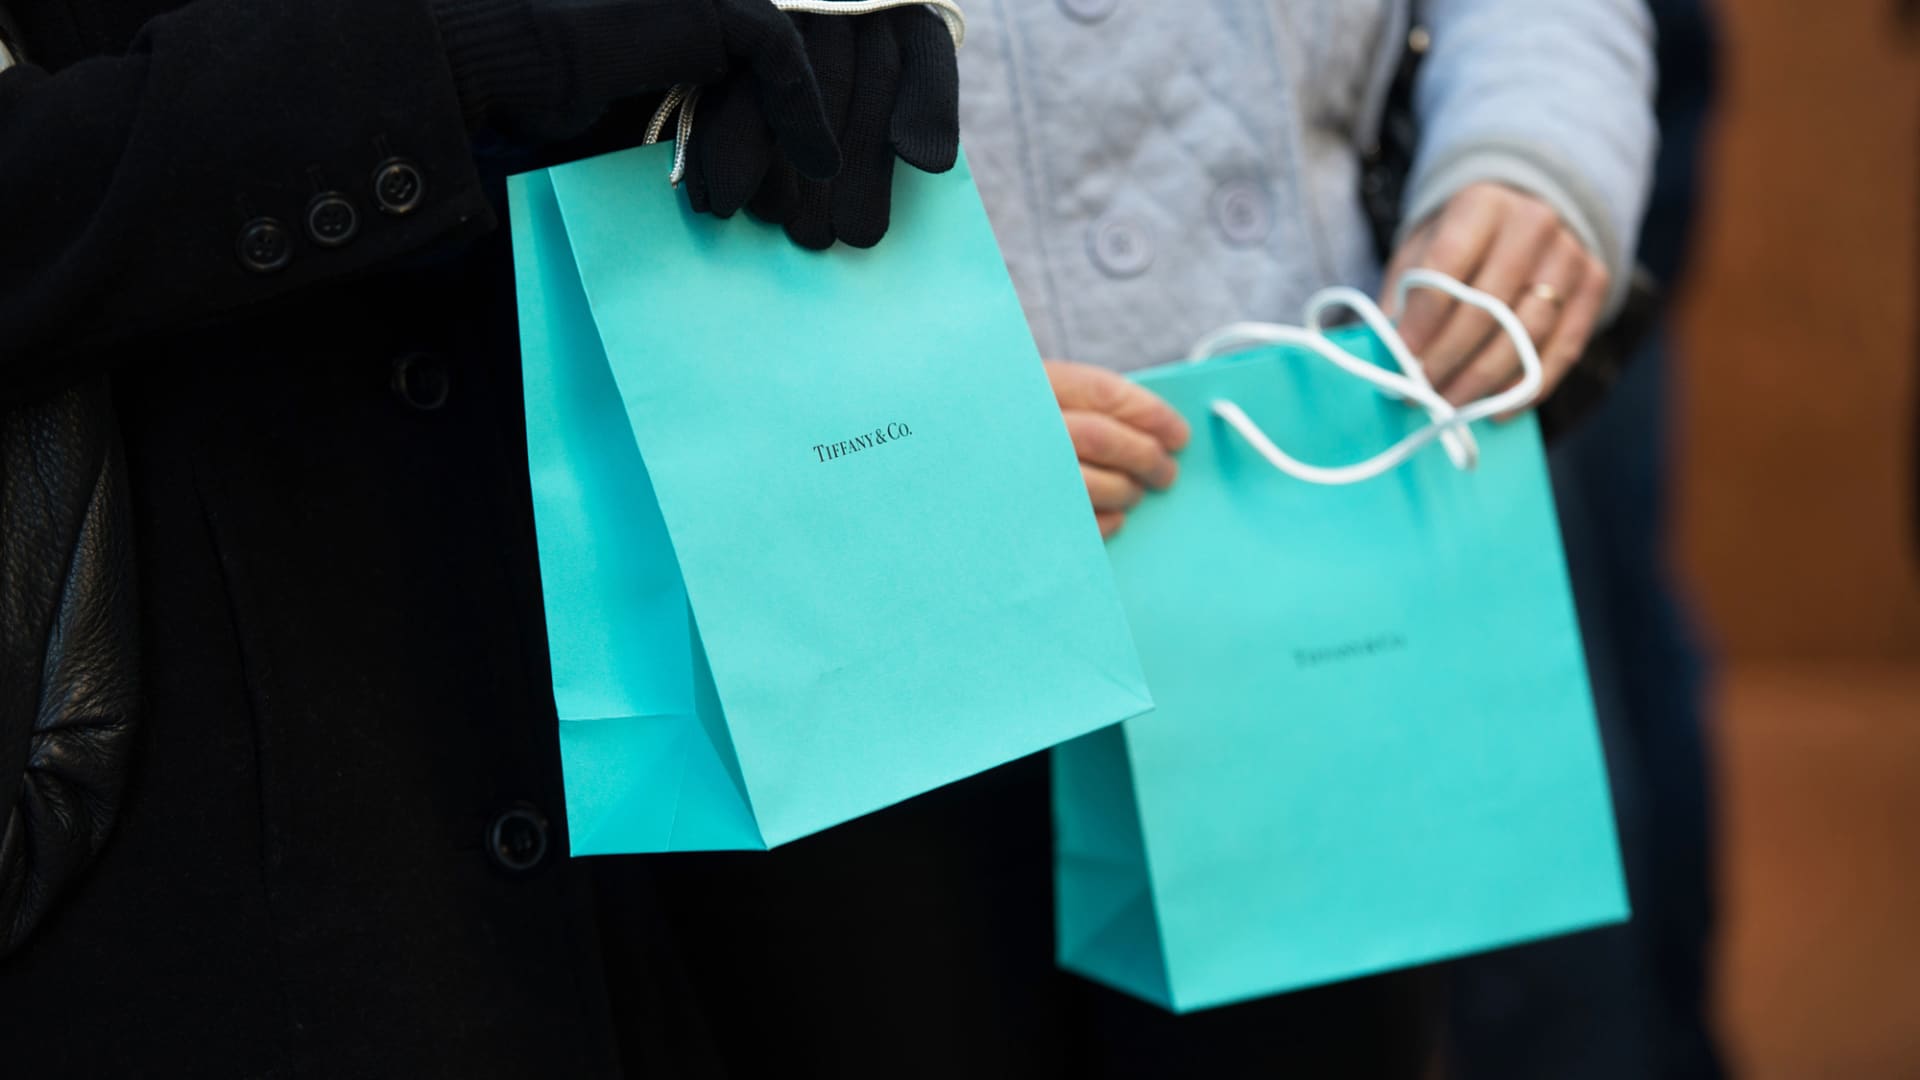 Stocks making the biggest moves midday: Tiffany, Nike, Avon